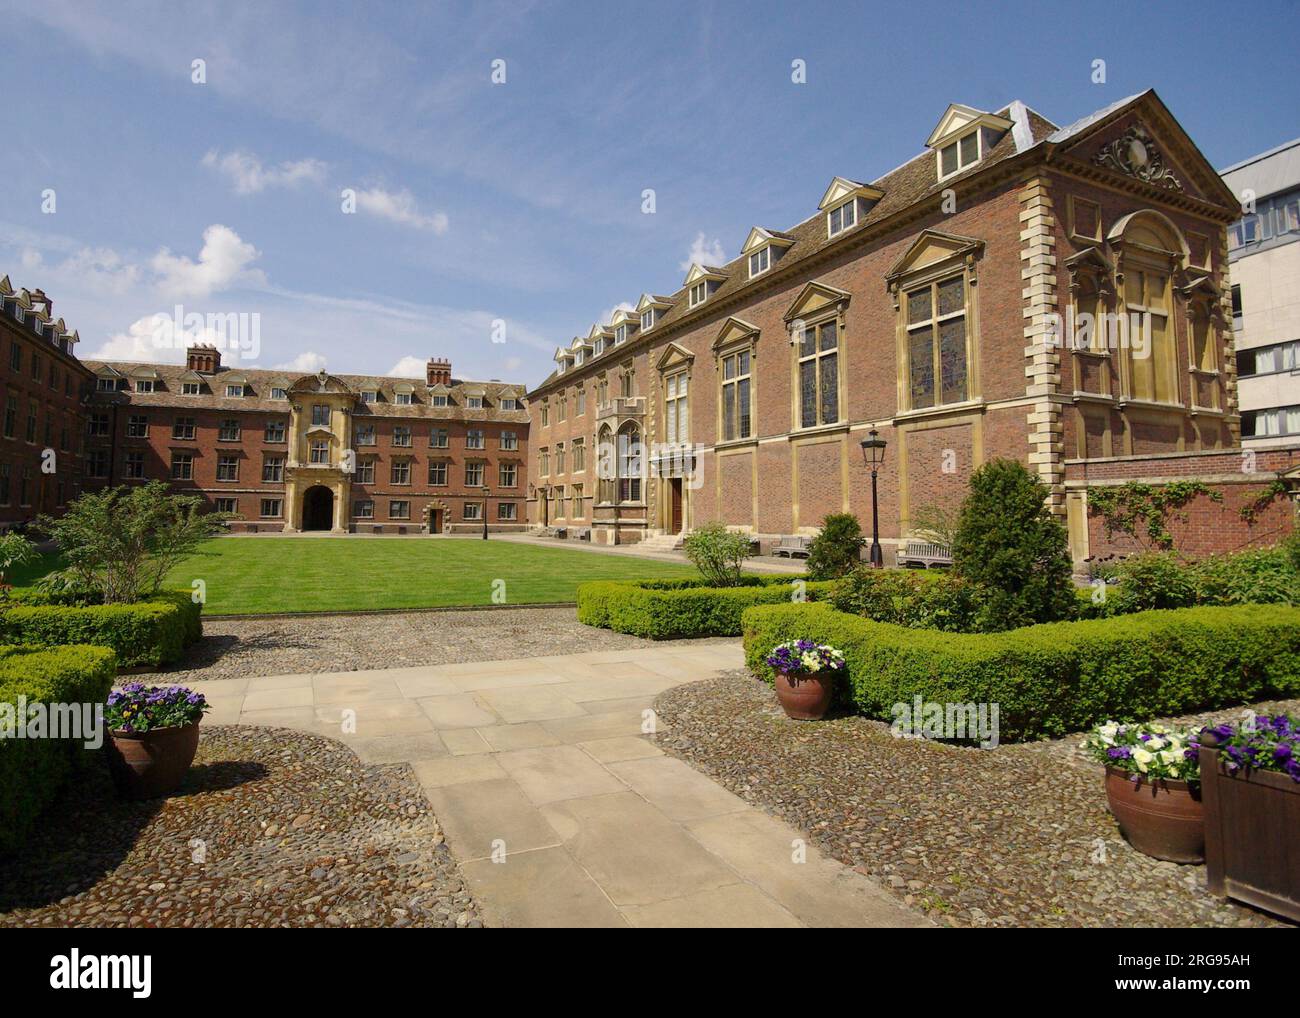 View of the Main Court of St Catharine's College, Cambridge, founded in the 15th century. Stock Photo